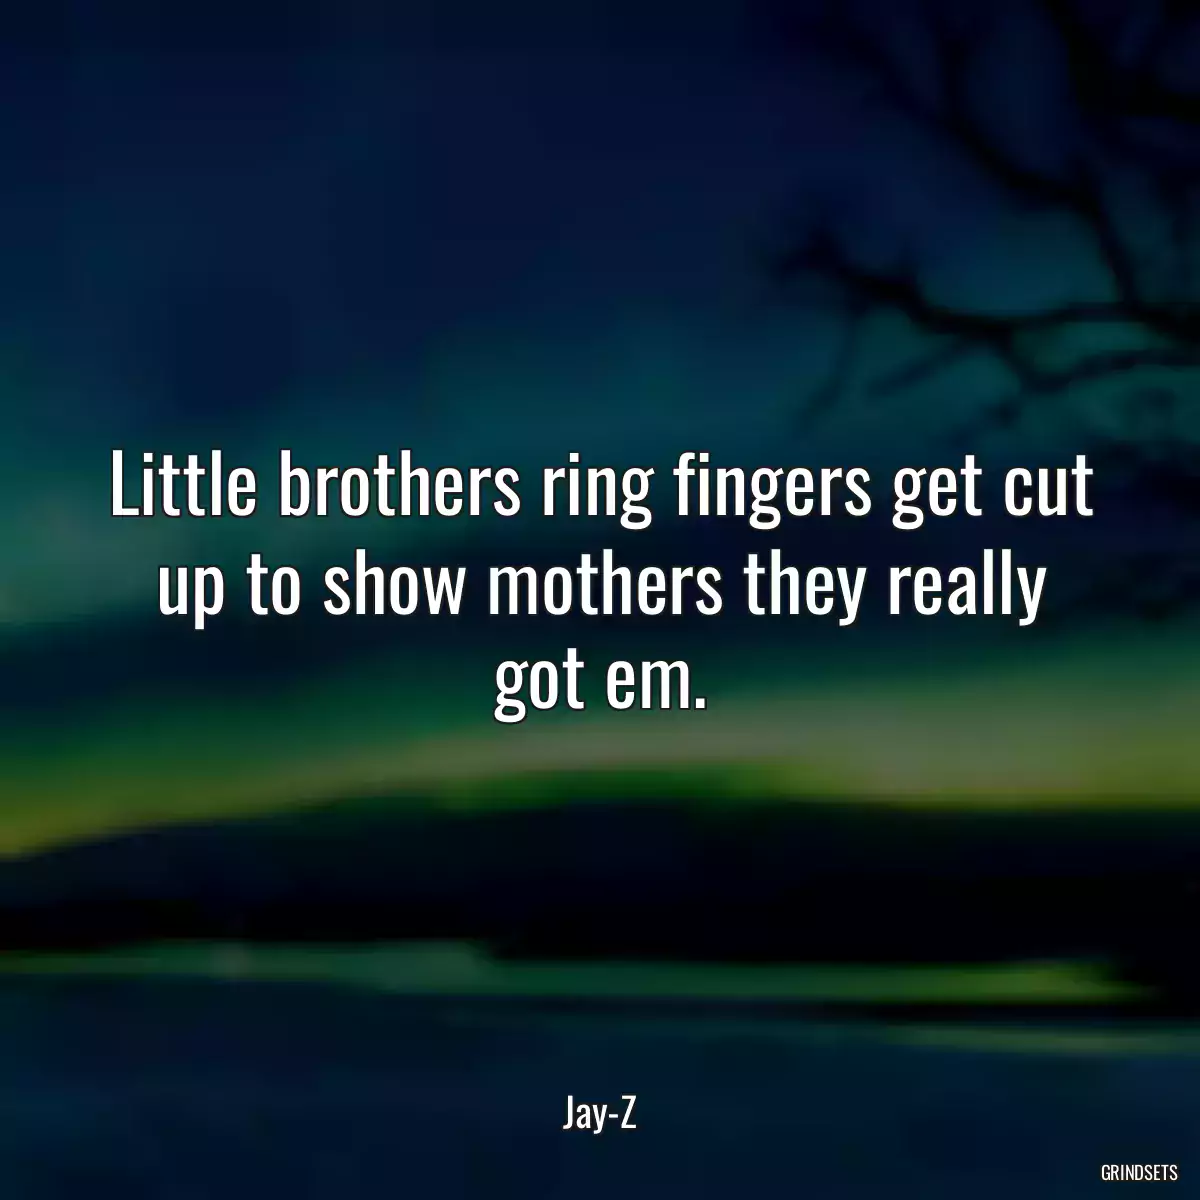 Little brothers ring fingers get cut up to show mothers they really got em.